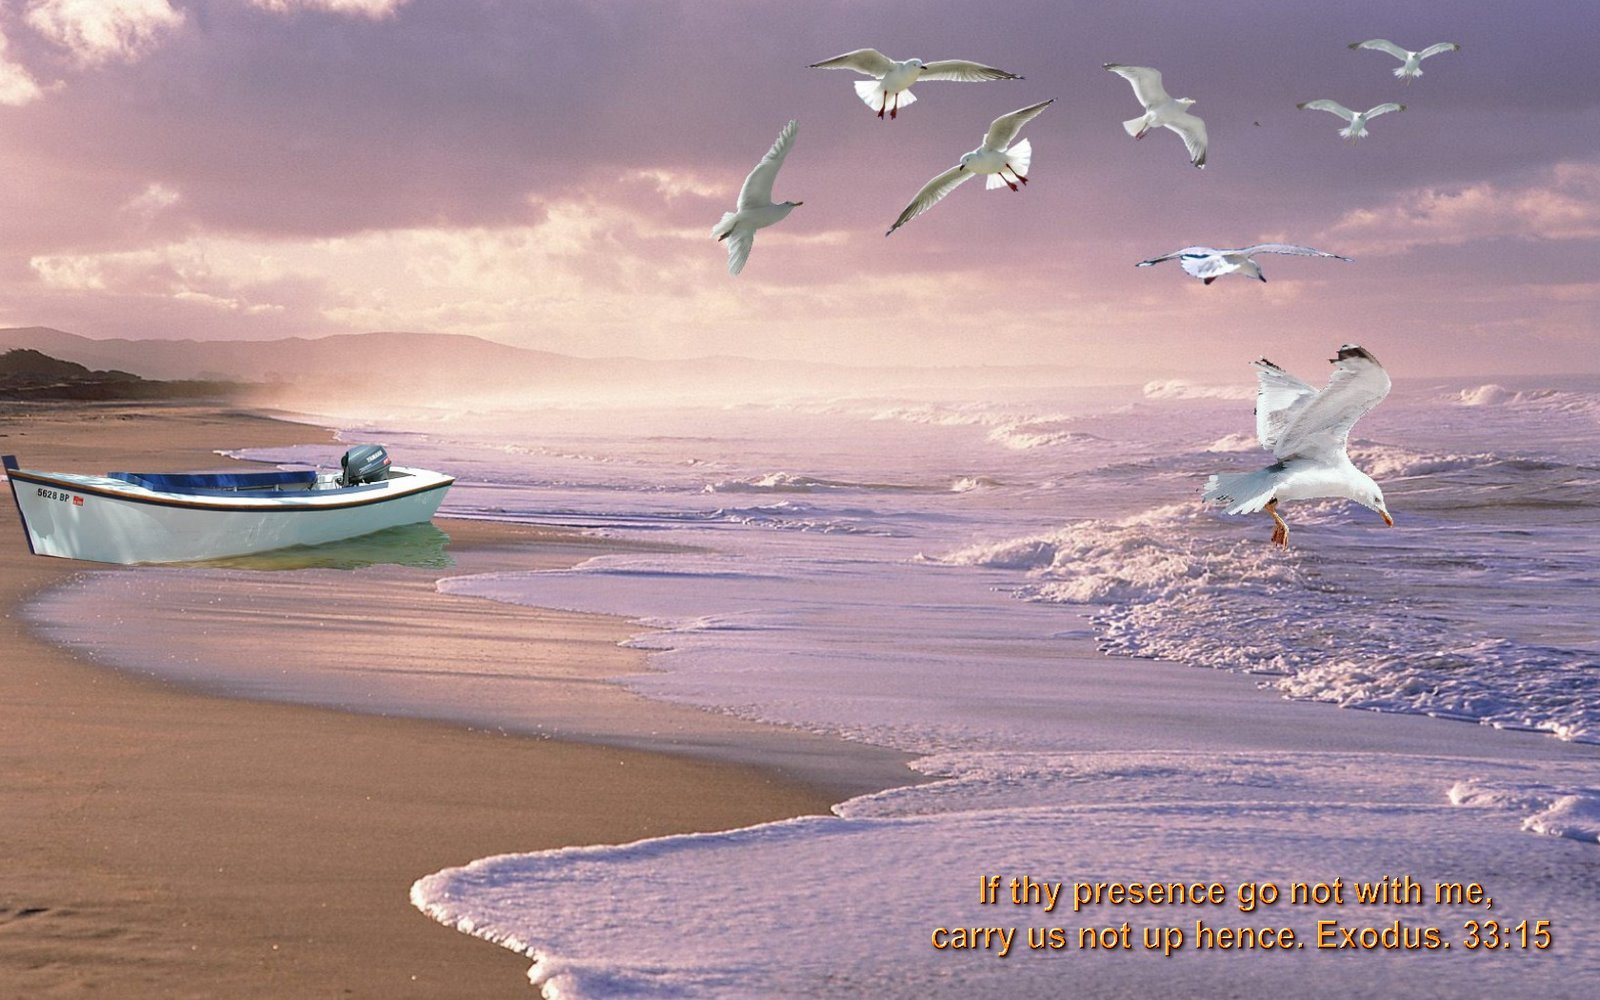 christian wallpapers with bible verses ocean